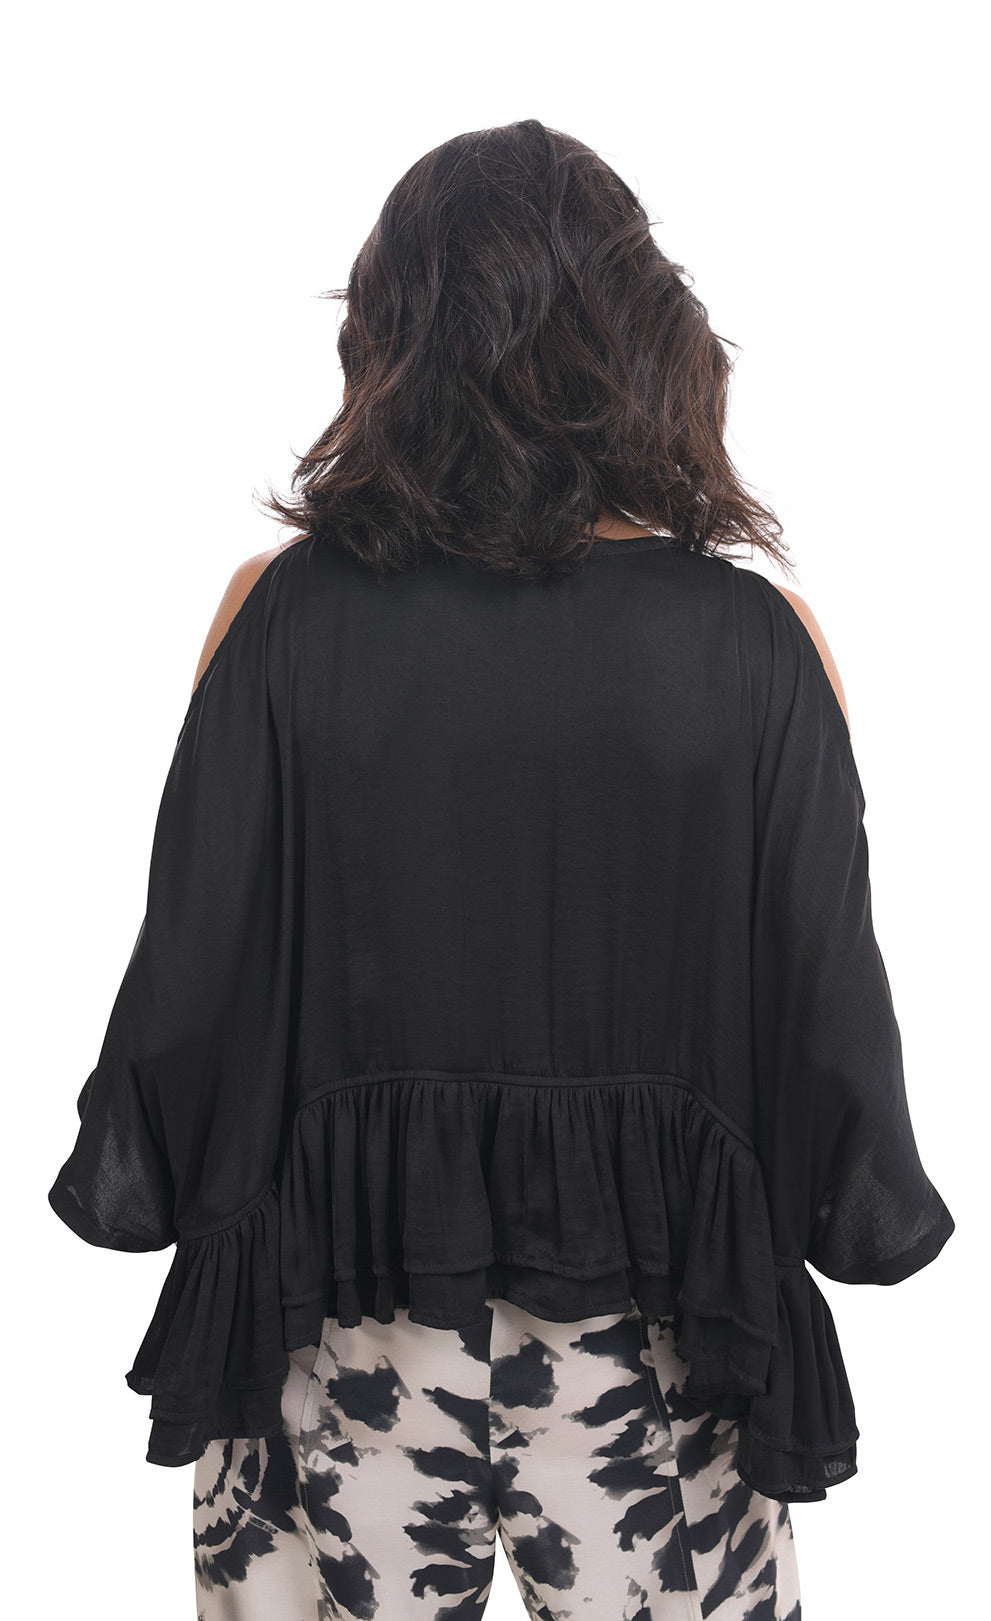 Back top half view of a woman wearing the rhys ruffle blouse in black. This top has a cold shoulder, 3/4 length sleeves, and a ruffled hem. On the bottom the woman is wearing black and white printed pants.